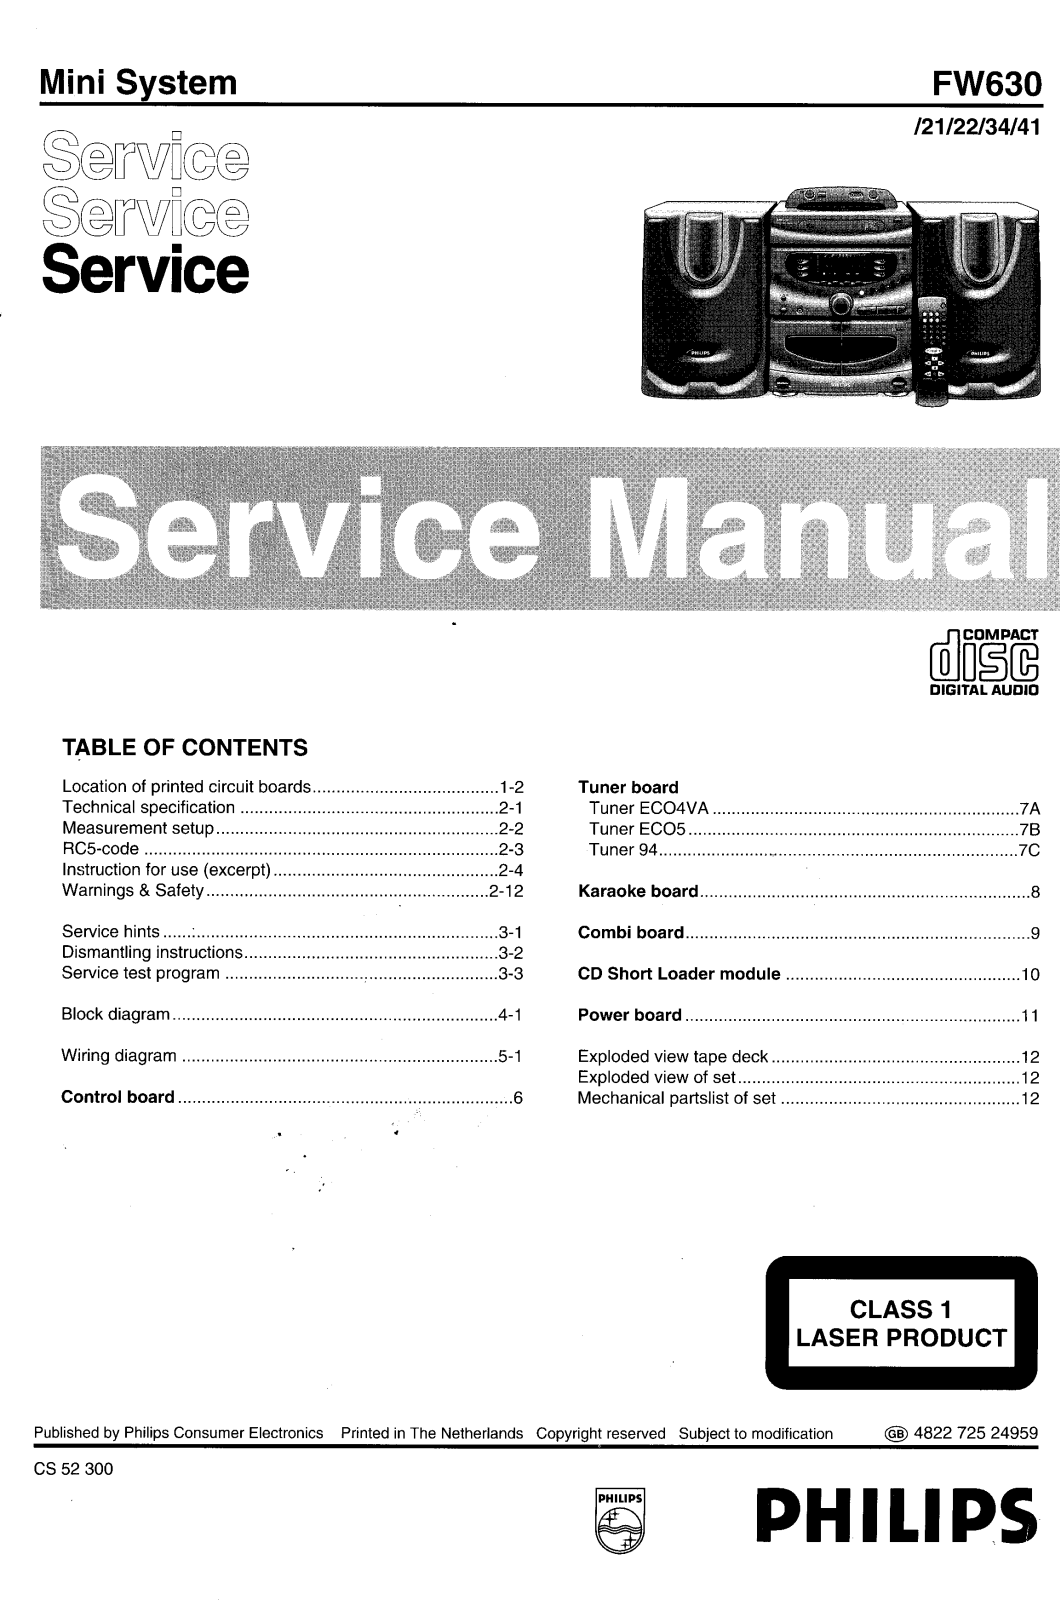 Philips FW630 Service manual